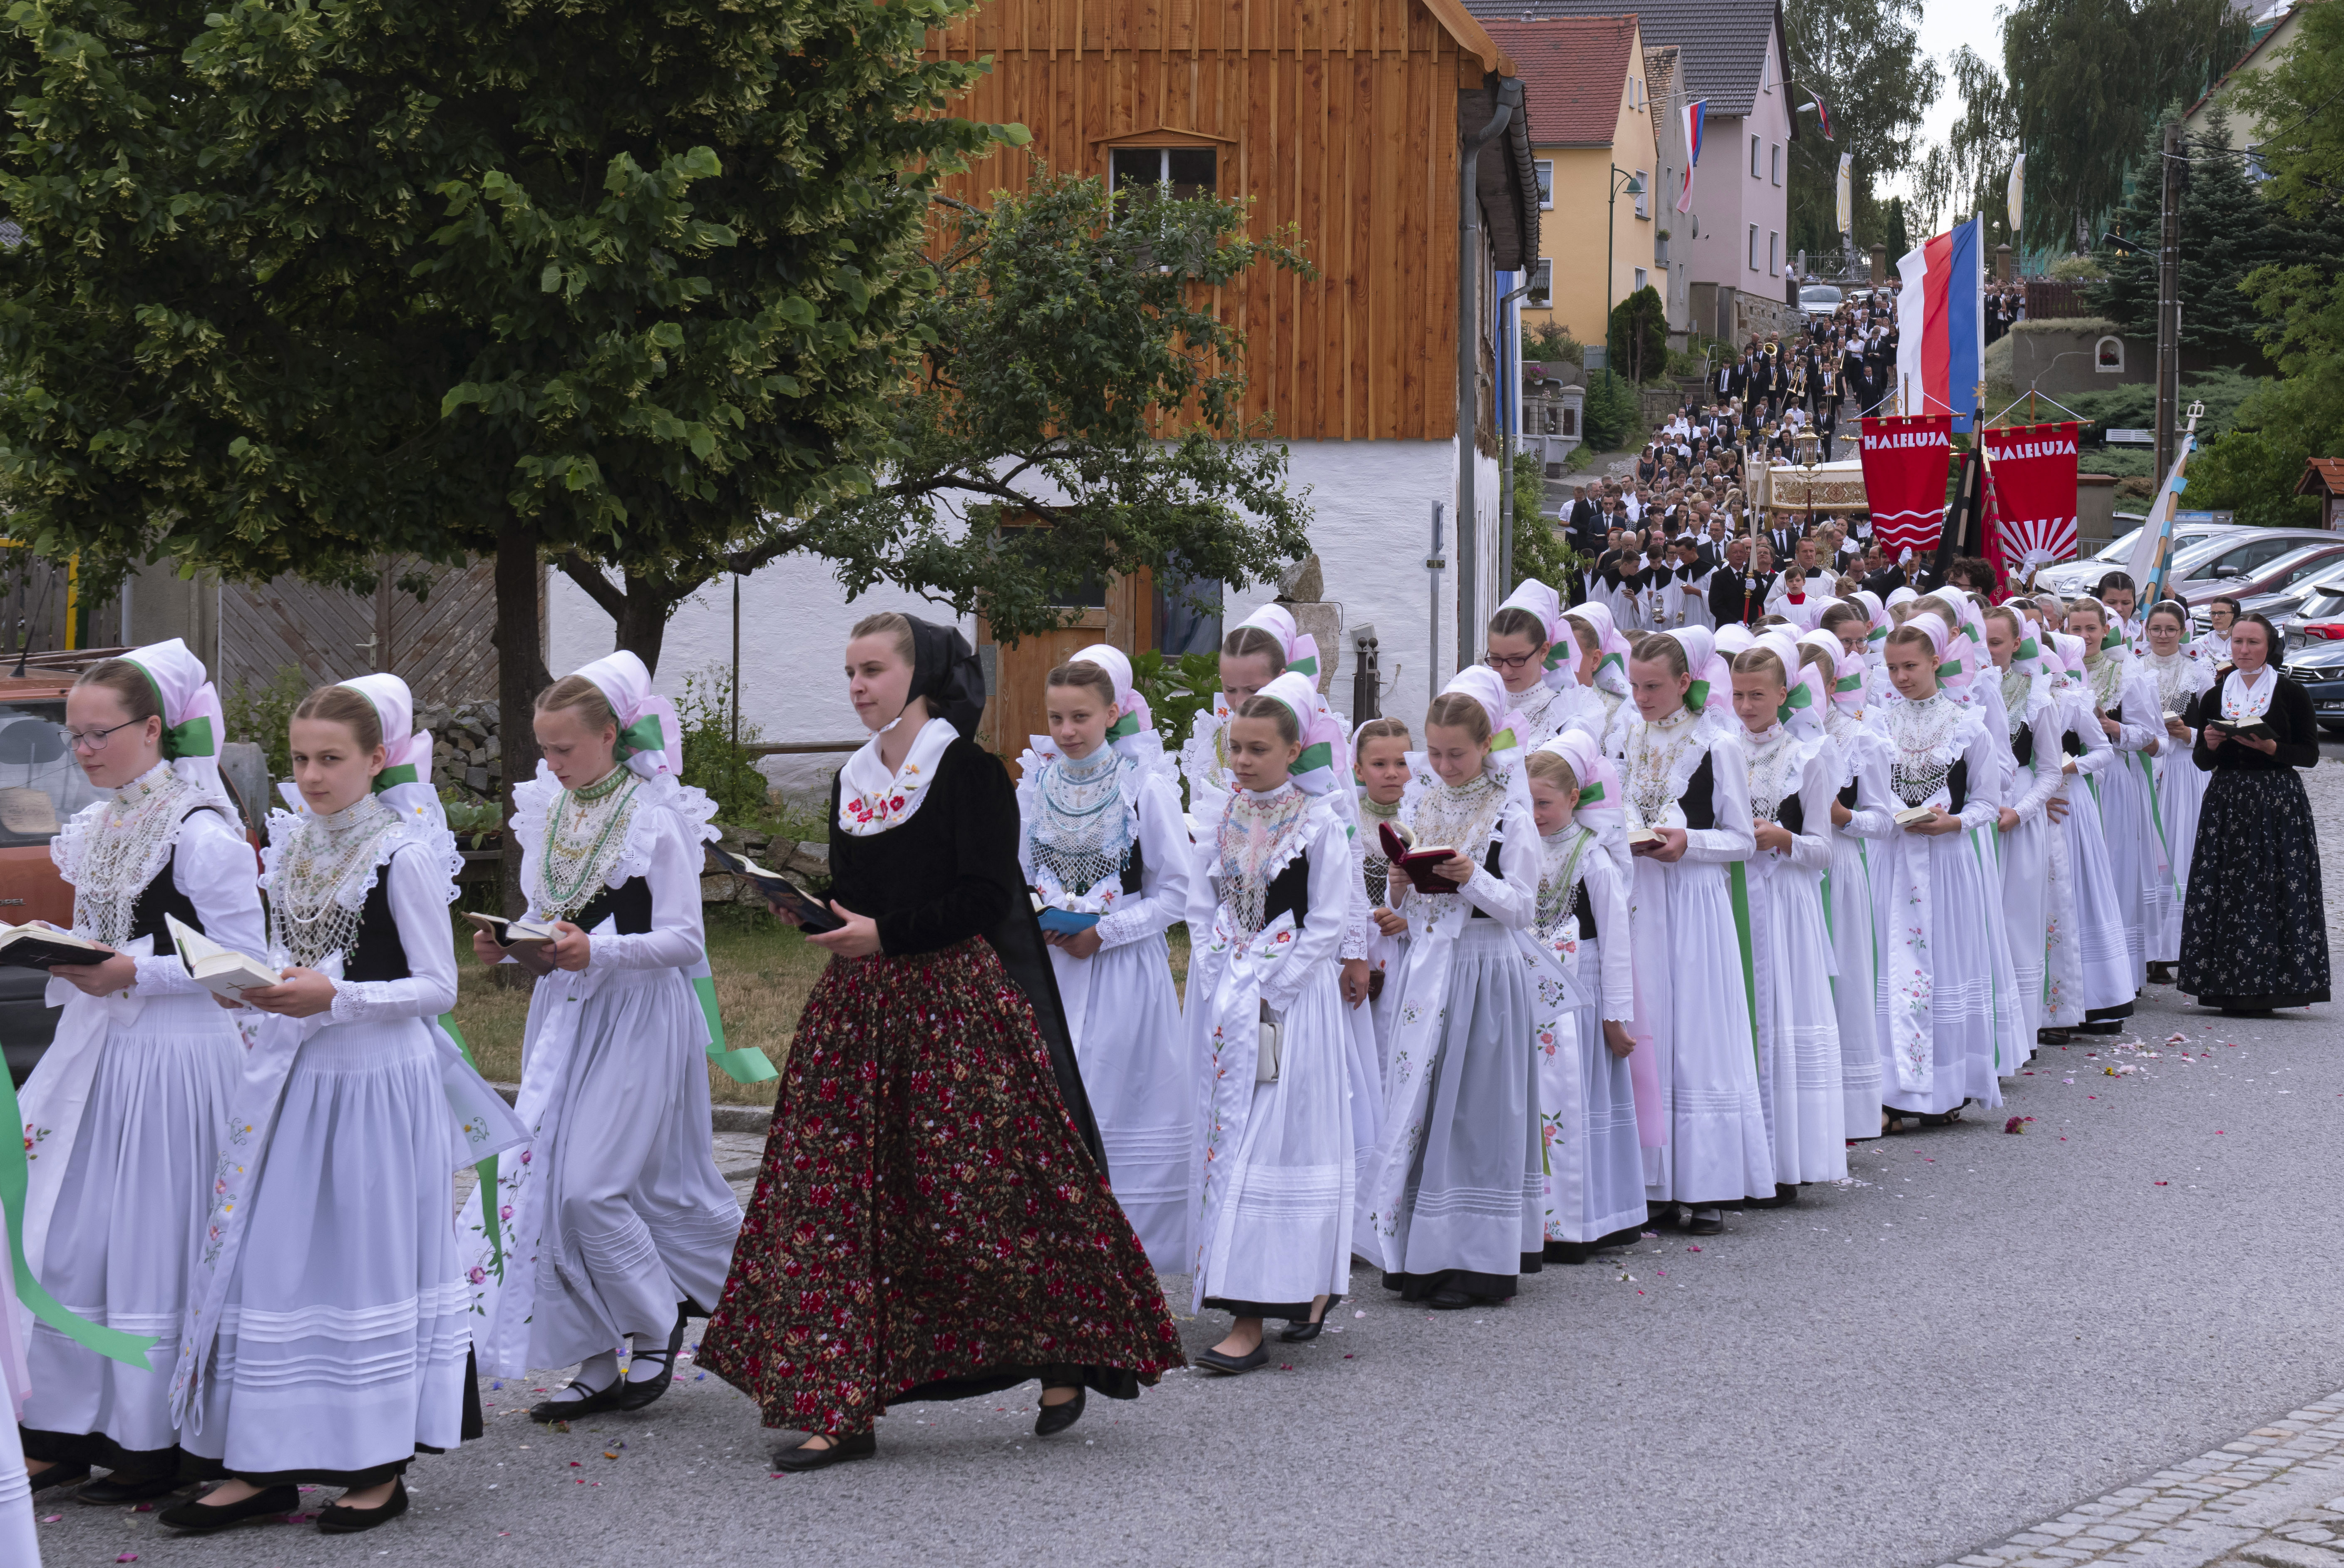 People dressed in the traditional clothes of the Sorbs attend a Corpus Christi procession in Crostwitz, Germany, Thursday, June 20, 2019. The catholic faithful Sorbs are acknowledged as a national minority near the German-Polish border with their own language in eastern Germany. The procession to commemorate the solemnity of the body and blood of Christ has been a tradition in Lusatia (Lausitz) region. (AP Photo/Jens Meyer)